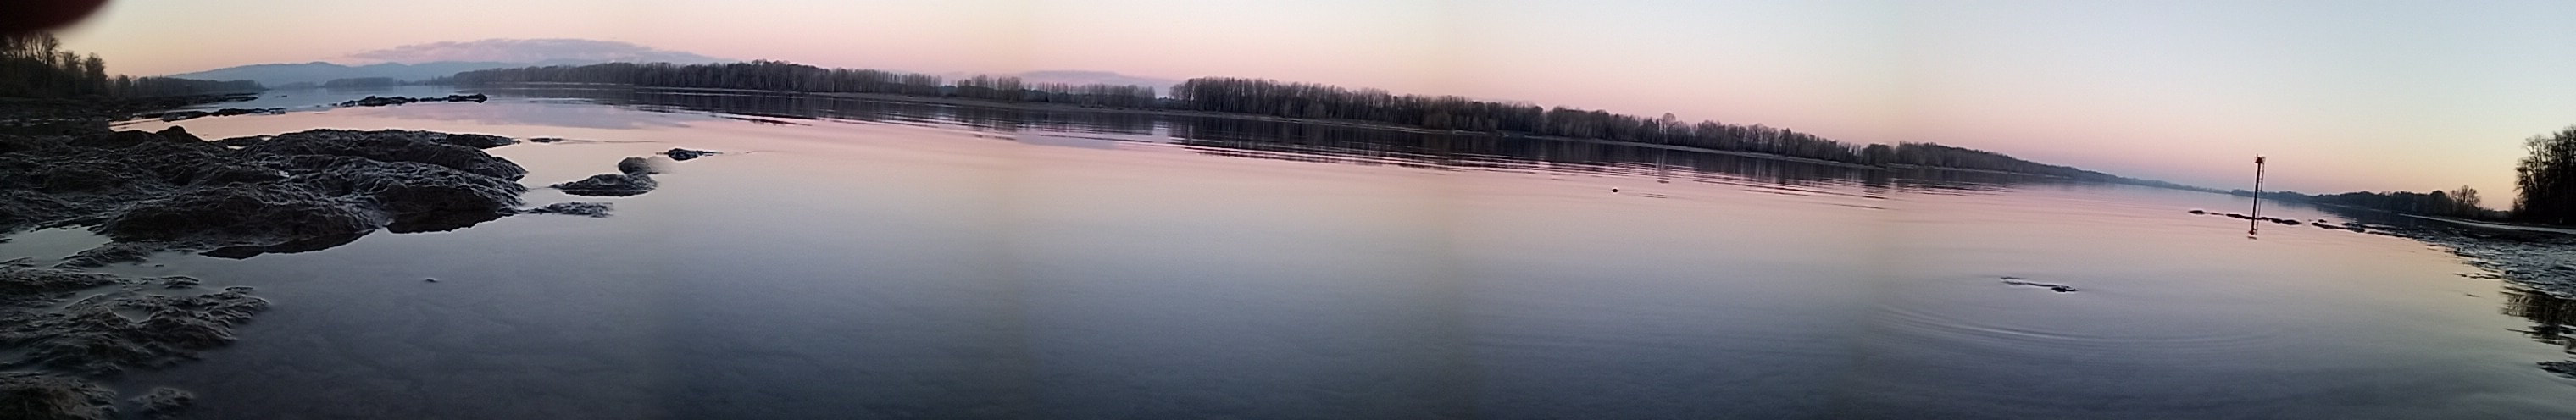 A Panoramic Photo taken by me, Danny Grogg in February 2022, from Sauvie Island at Sunset, looking North-Northeast across the Columbia River, just one foot above the surface of the water.